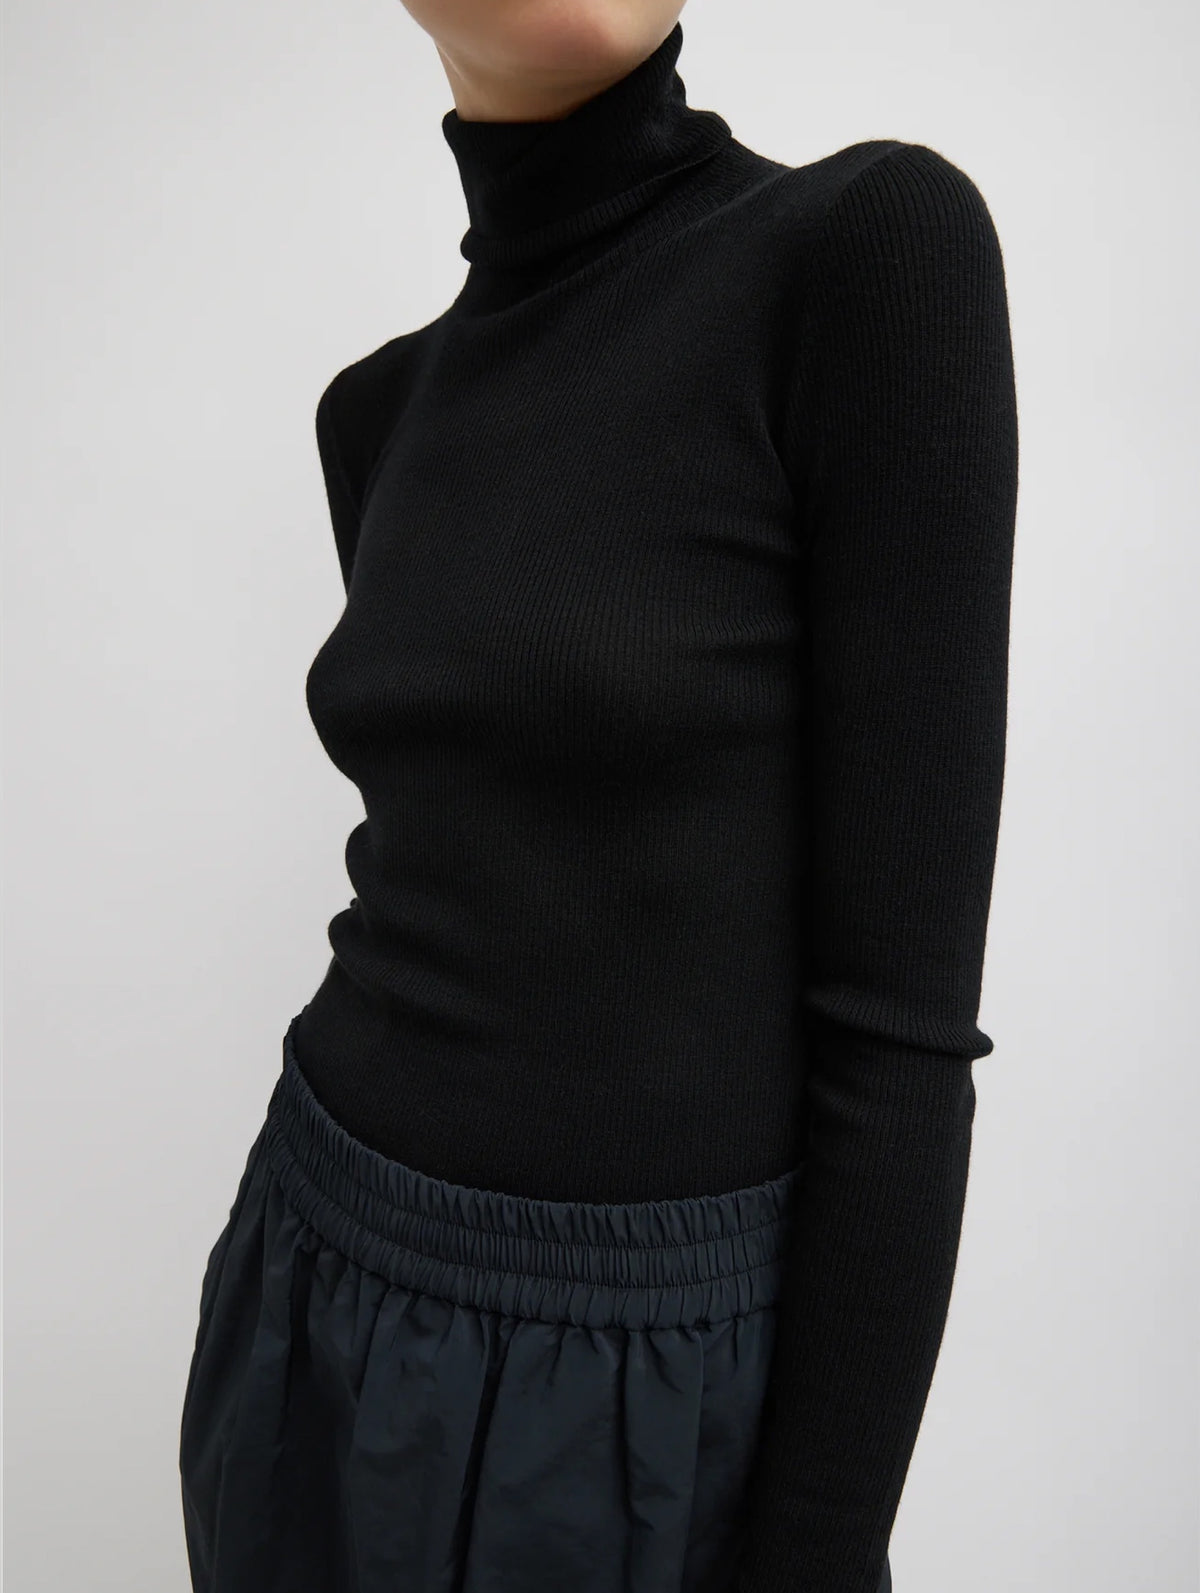 Feather Weight Ribbed Turtleneck Sweater in Black